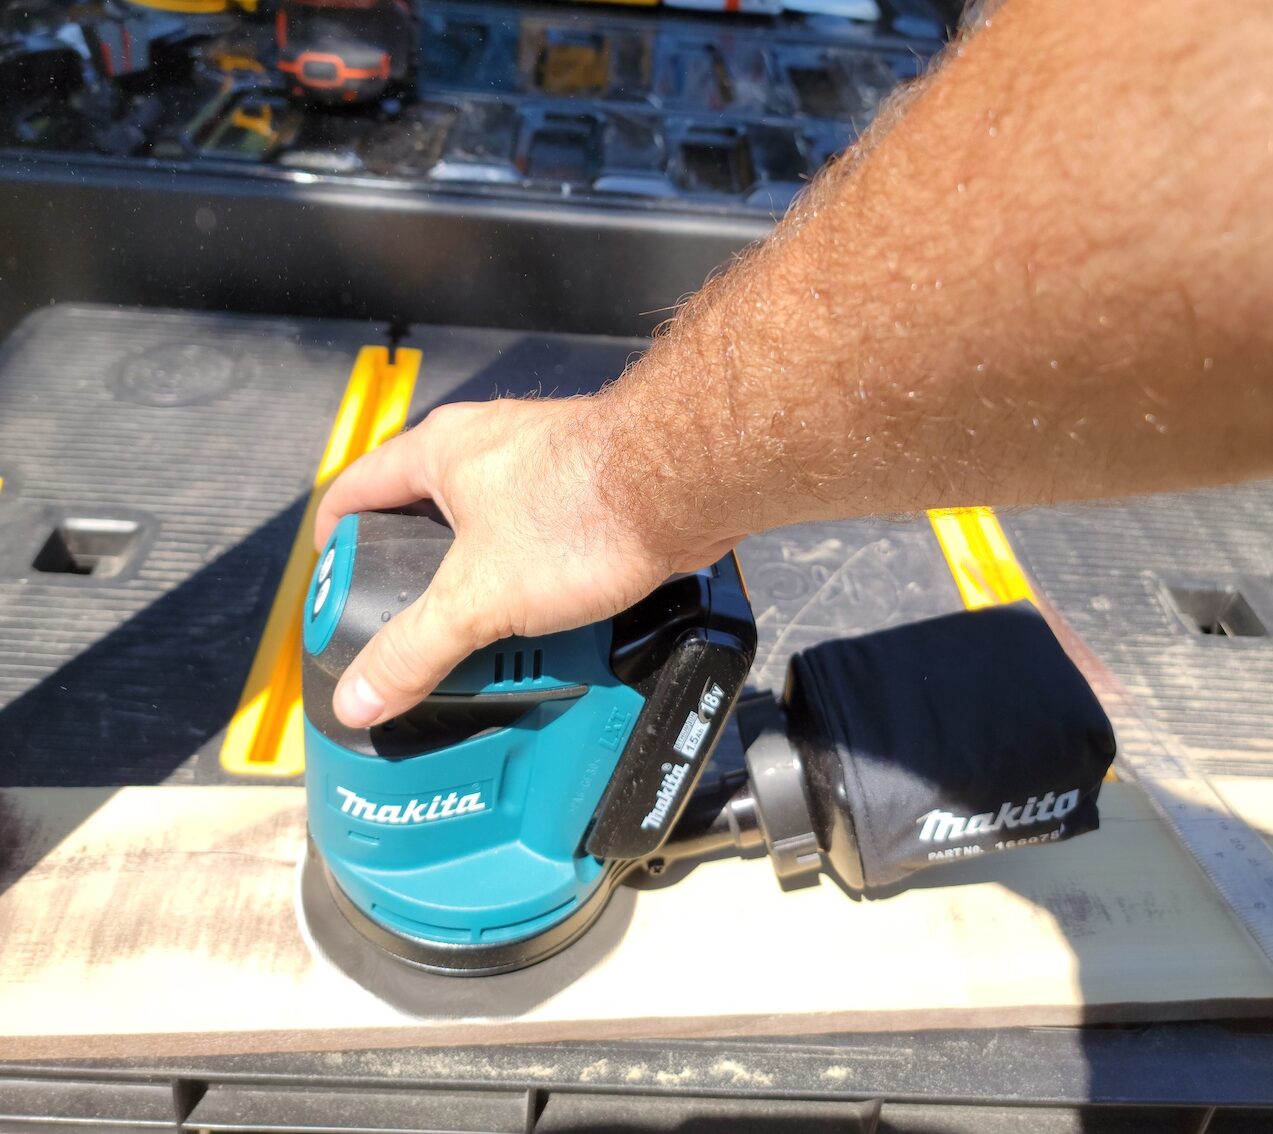 The Best Power Tools and DIY Products Option Makita 5-Inch Random Orbit Sander with Tool Case